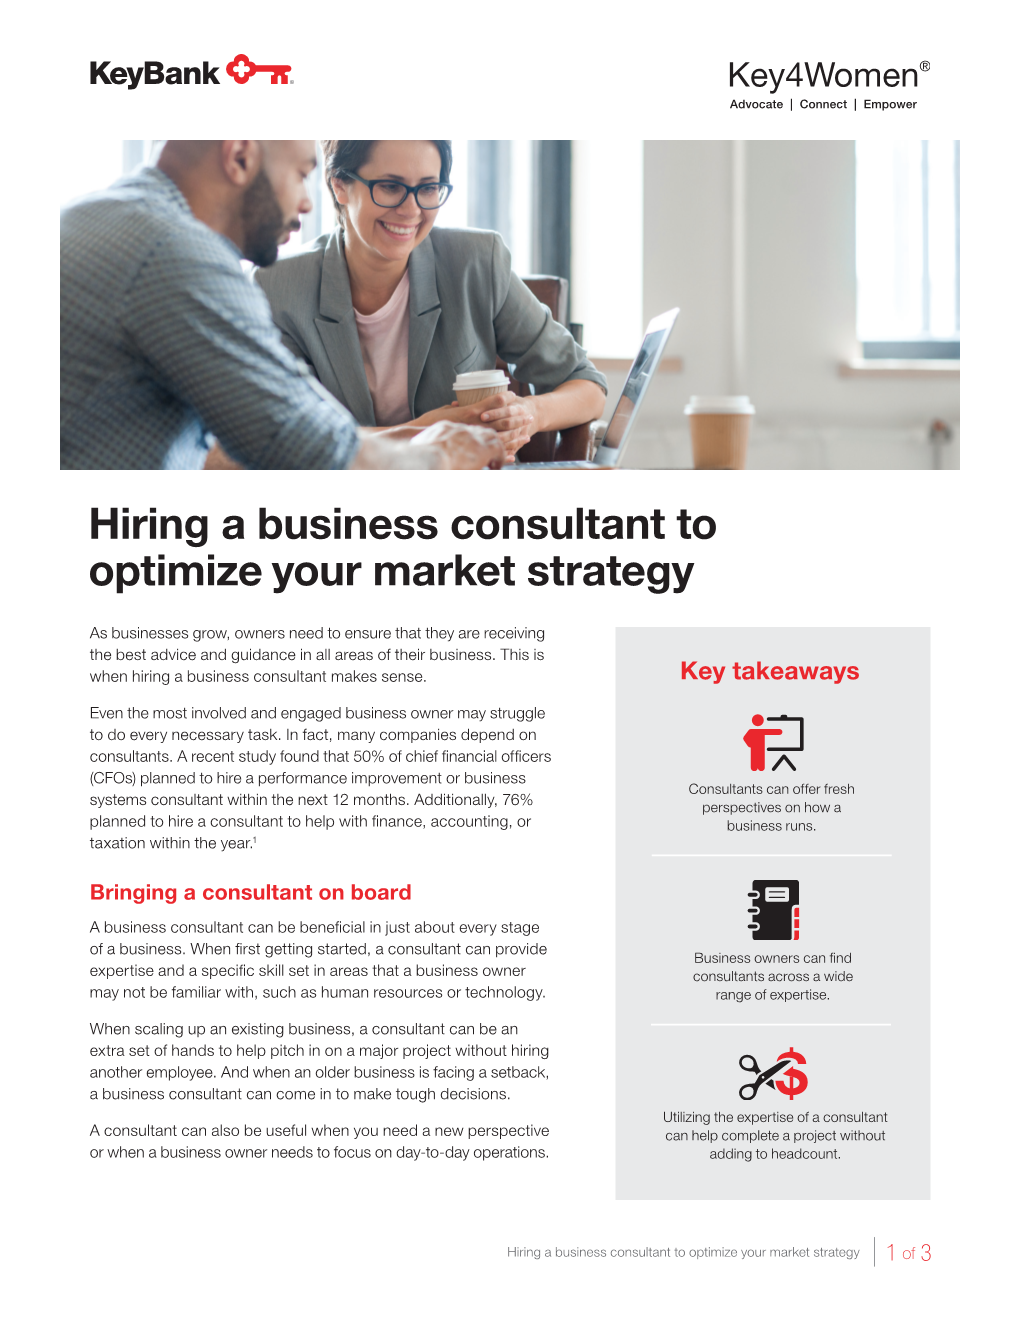 Hiring a Business Consultant to Optimize Your Market Strategy